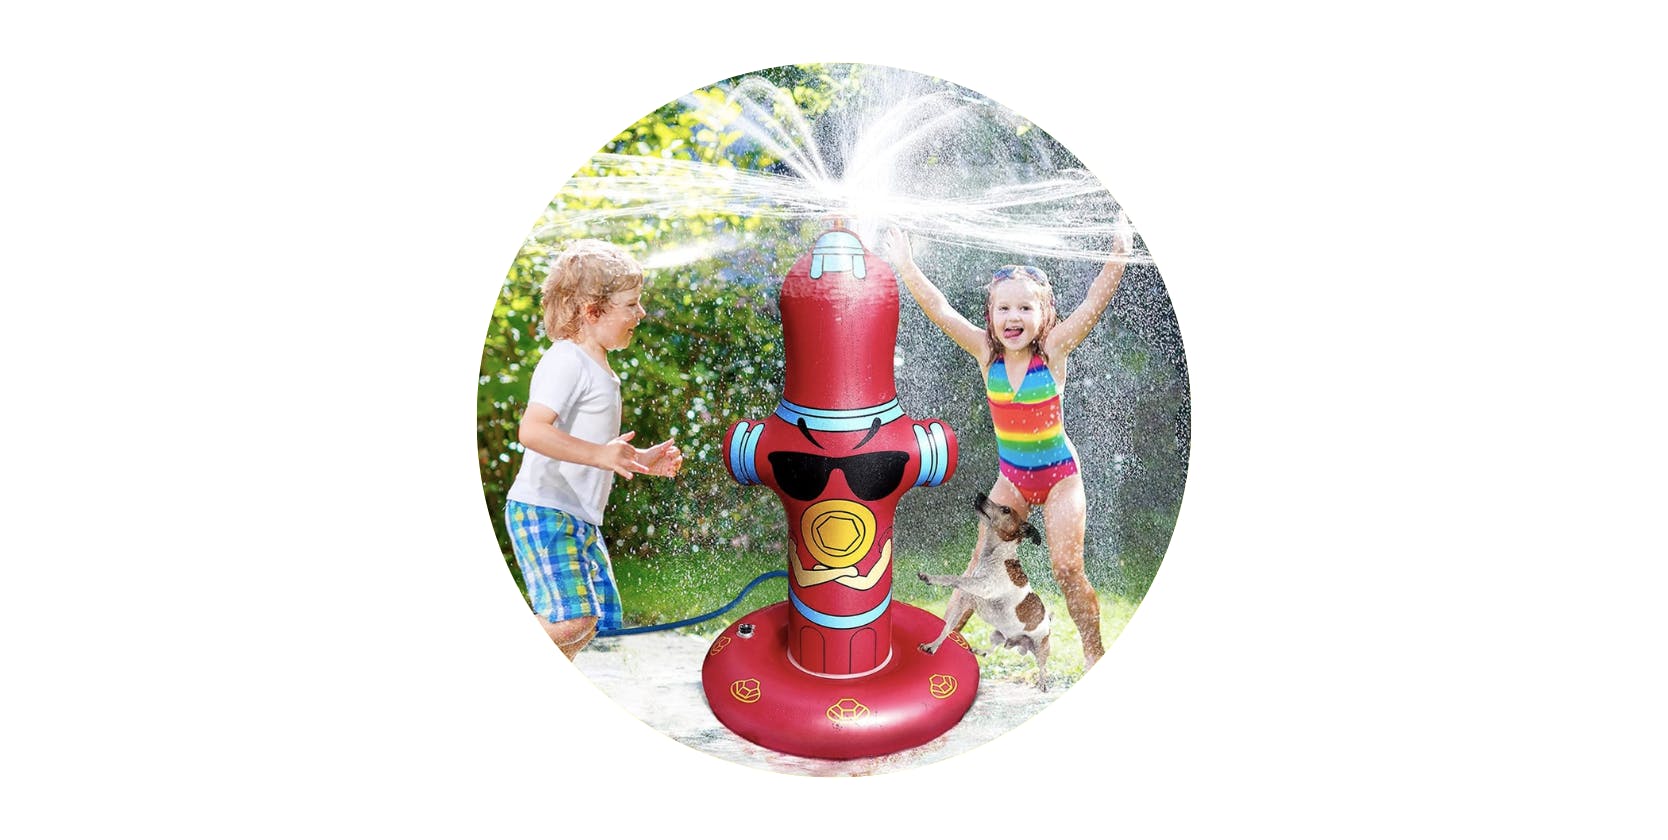 tanga 50-Inch Inflatable Fire Hydrant Water Sprinkler stock image 2023